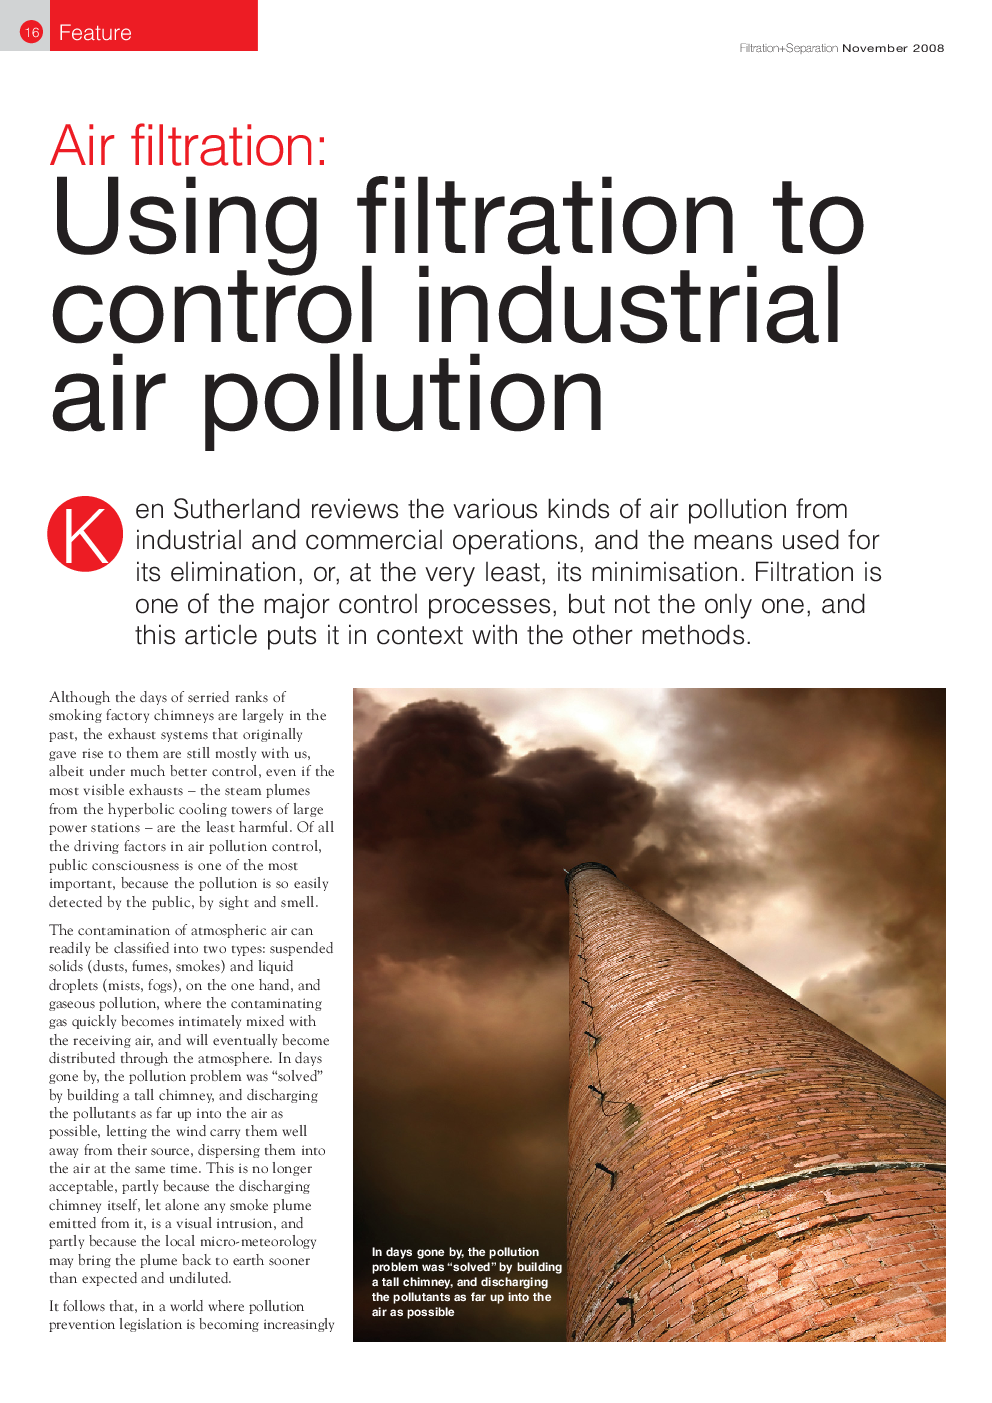 Air filtration: Using filtration to control industrial air pollution